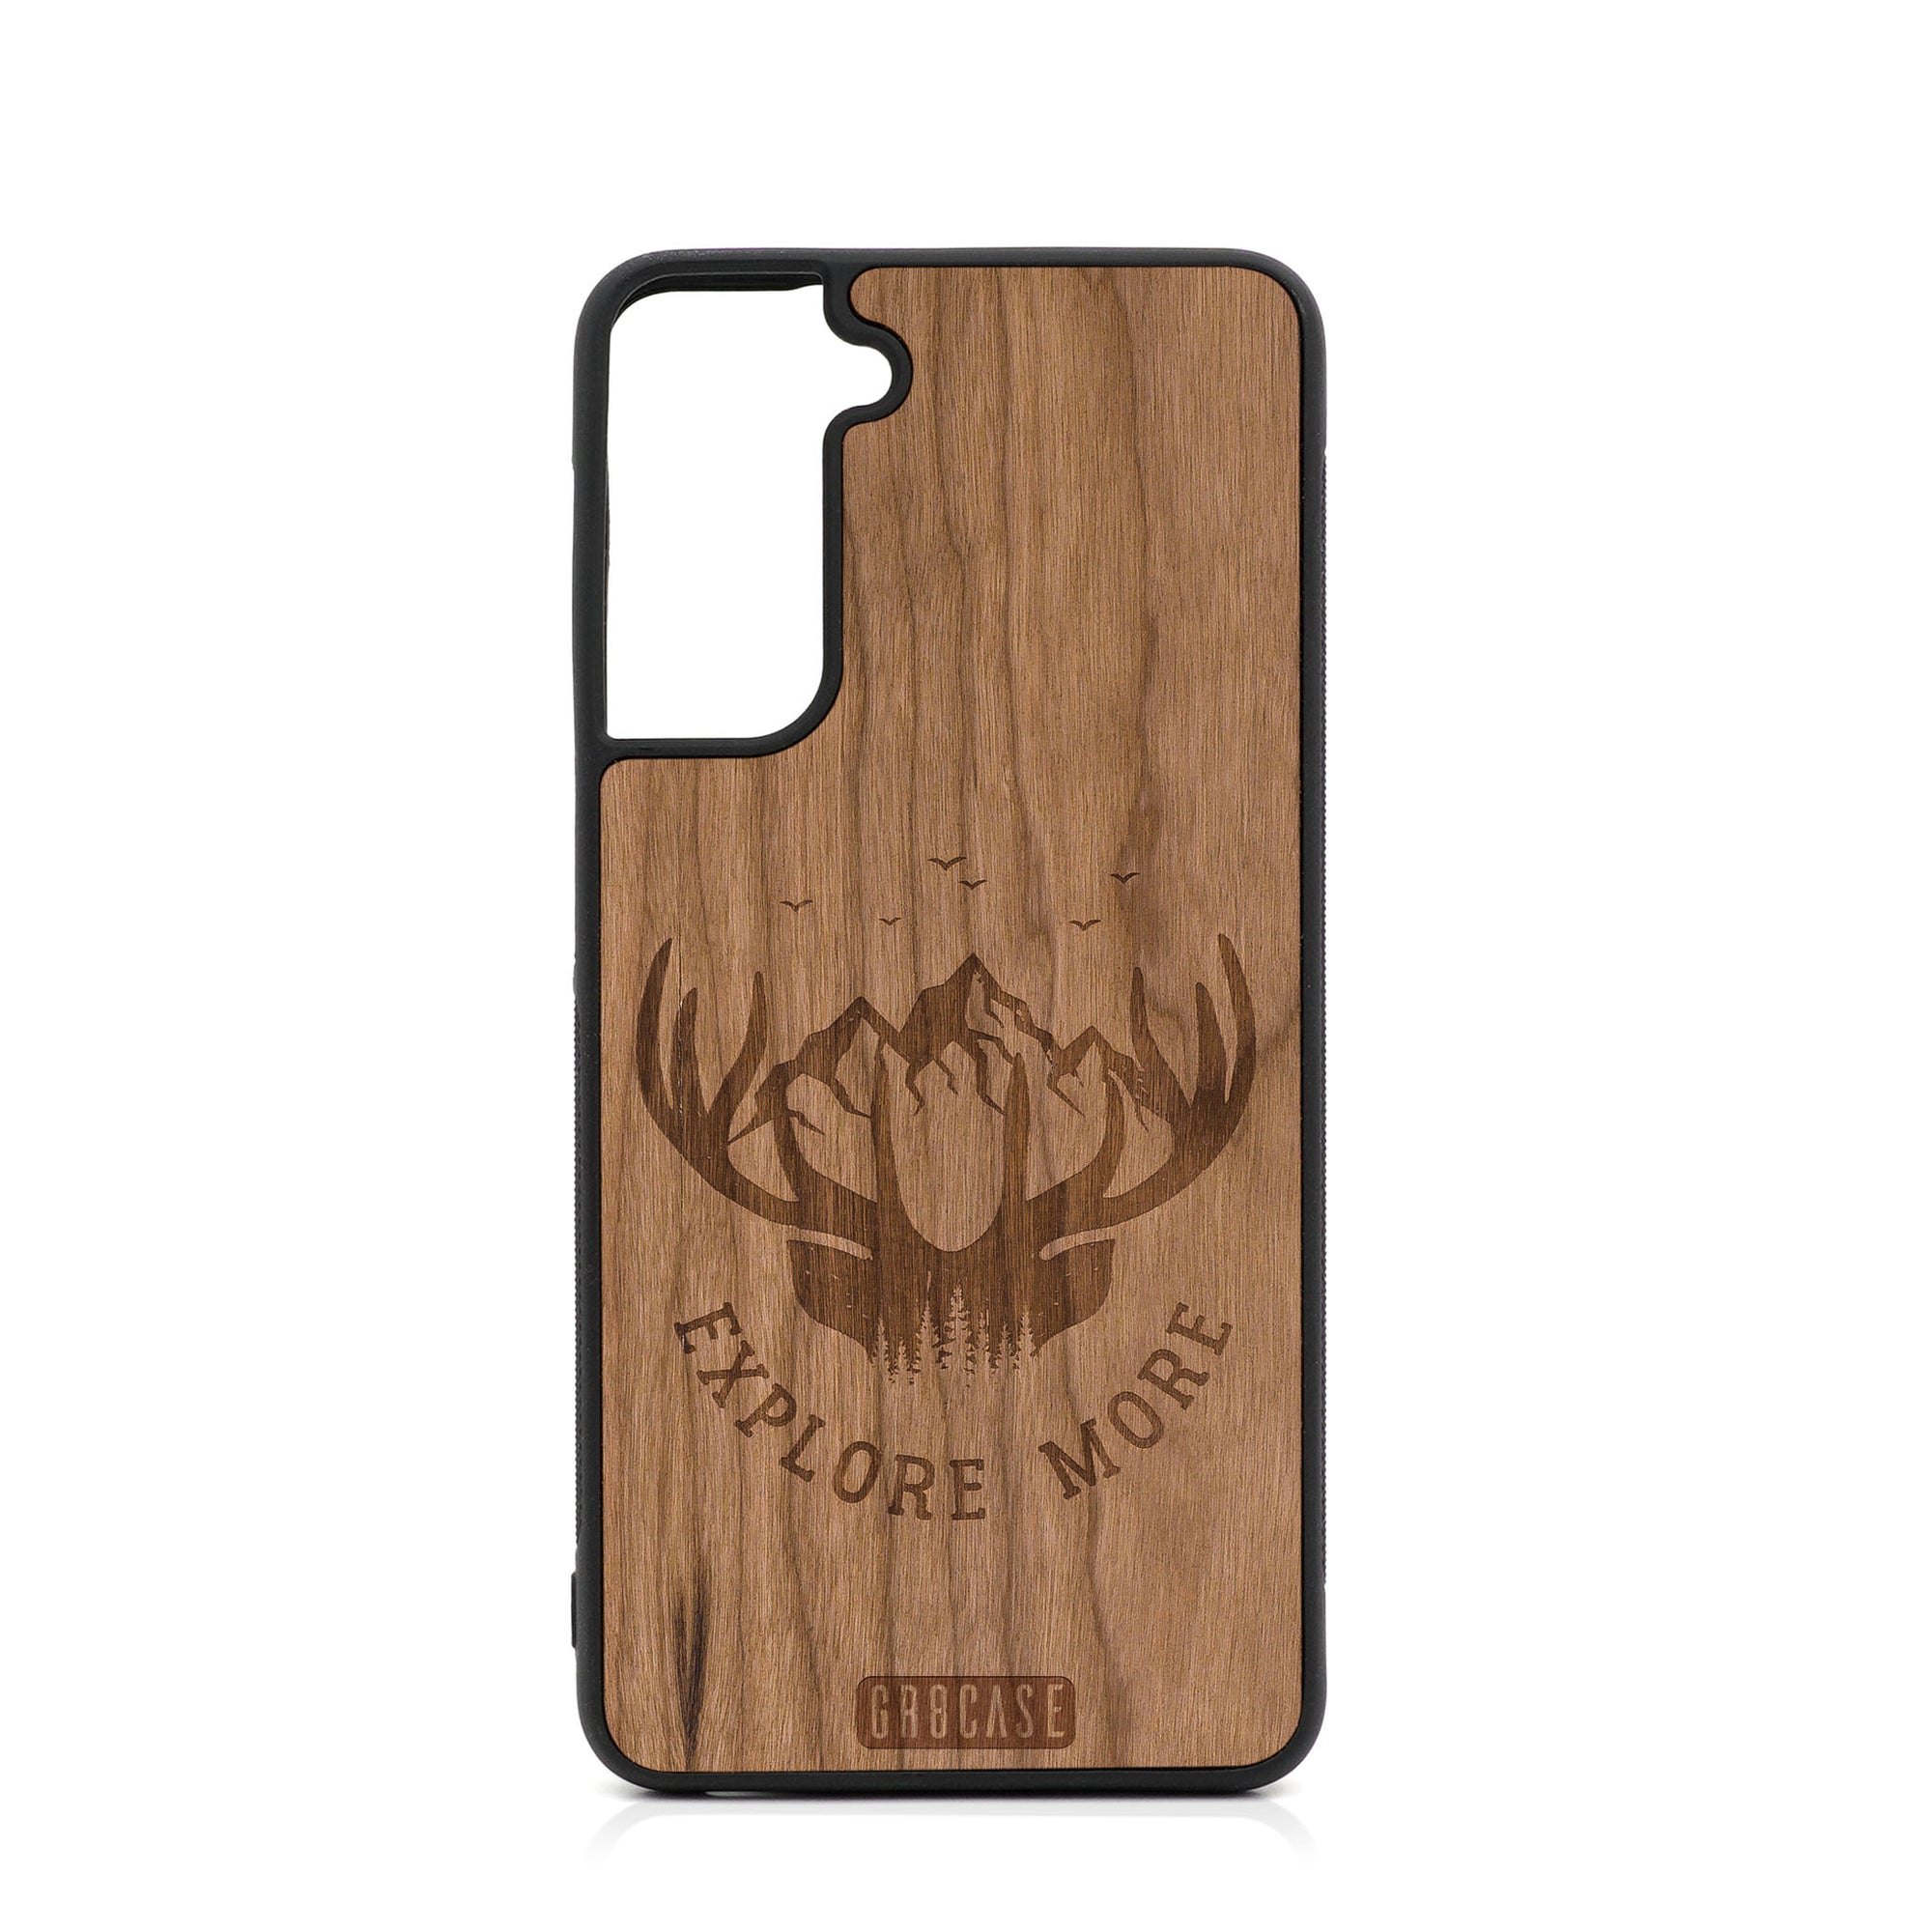 Explore More (Mountain & Antlers) Design Wood Case For Samsung Galaxy S21 Plus 5G